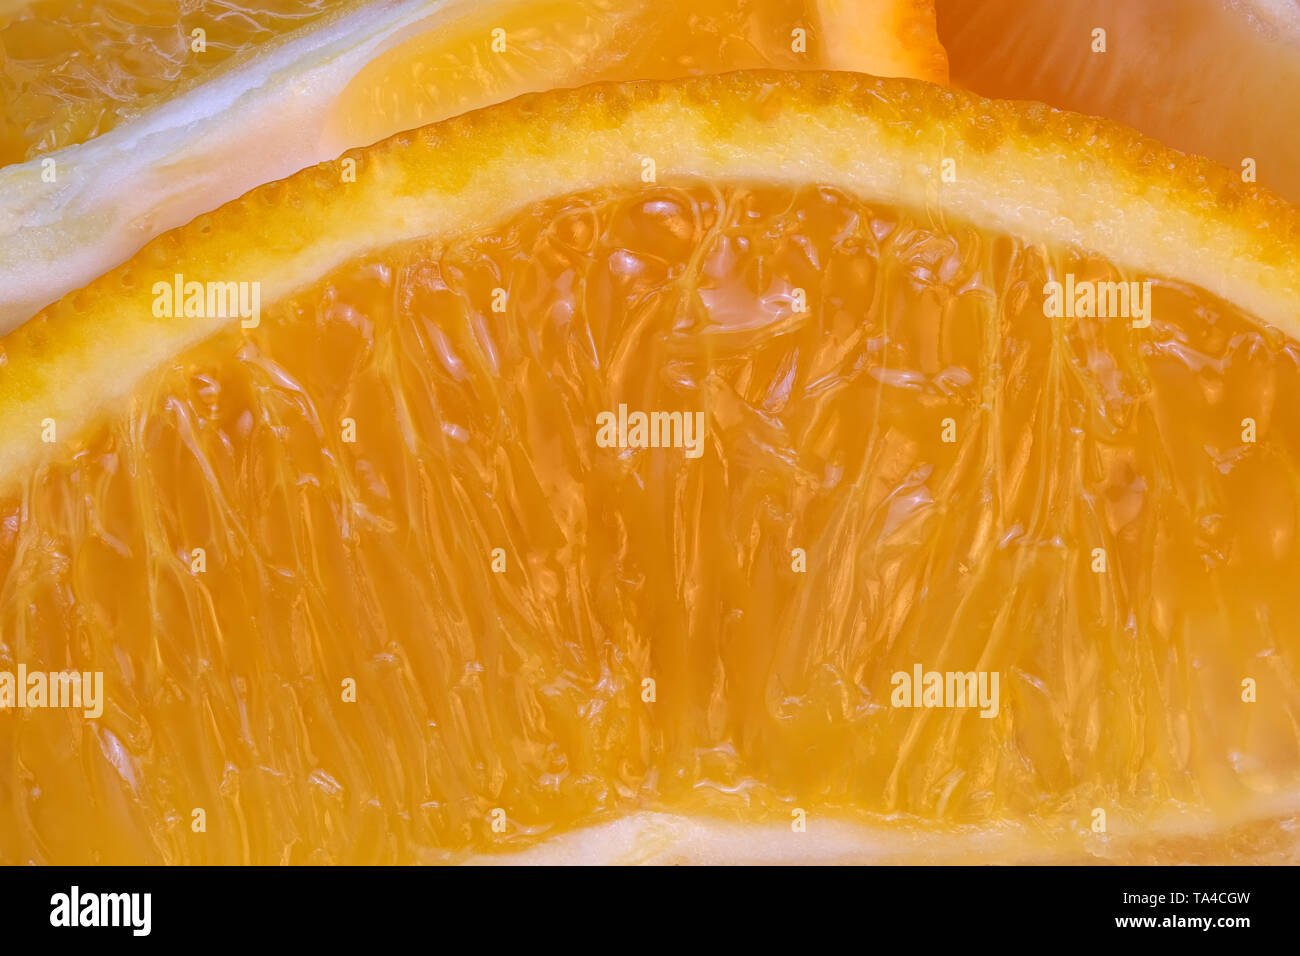 Sliced orange close-up full frame macro photo with great depth of field citrus background Stock Photo